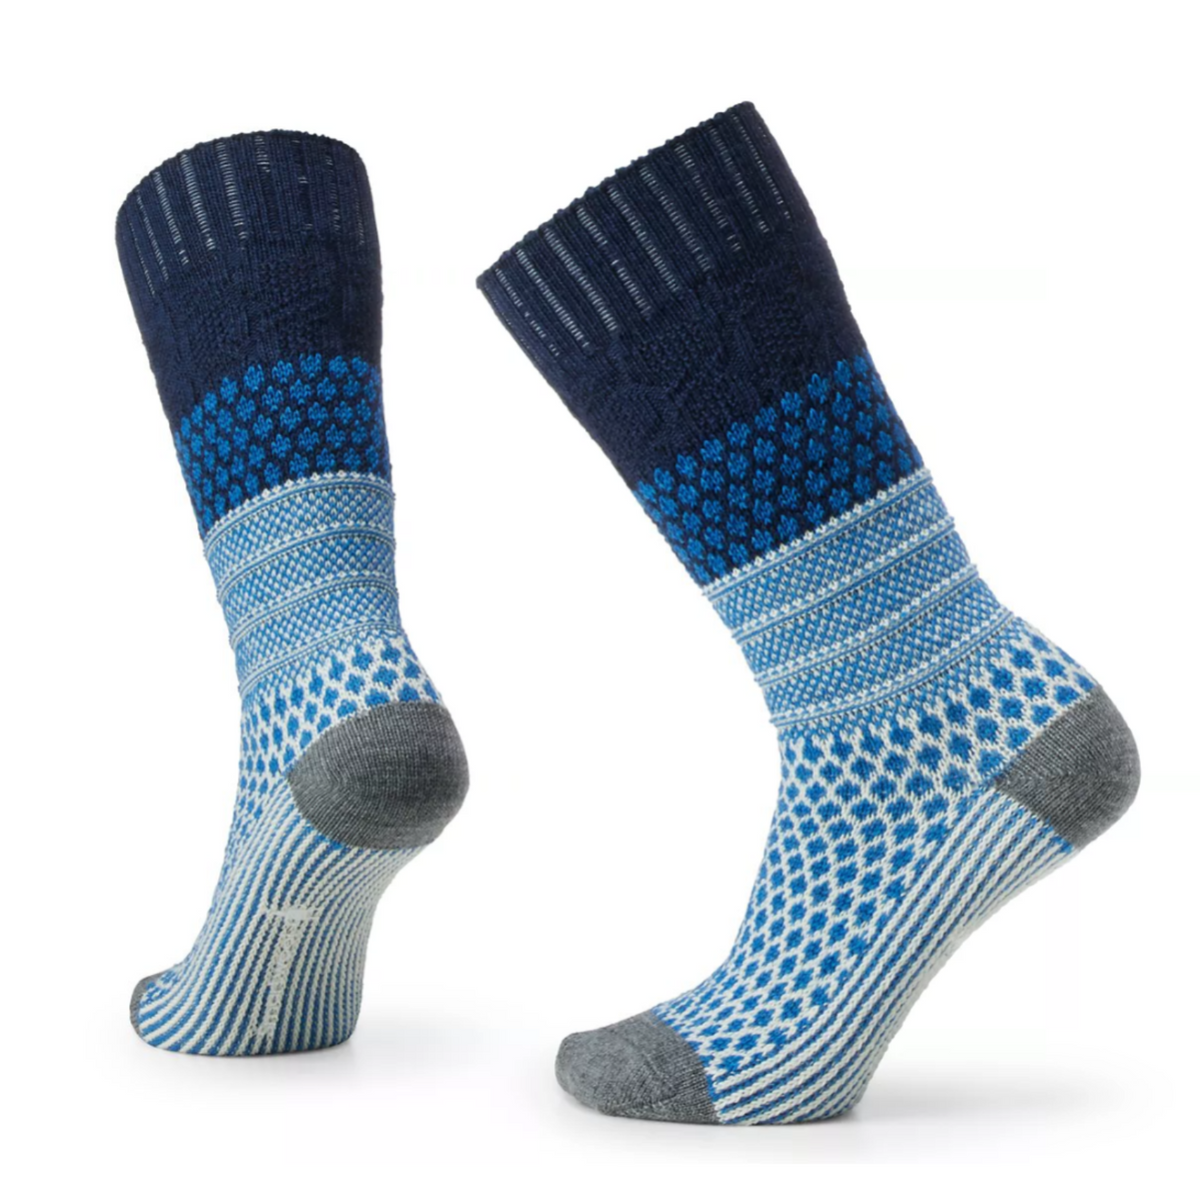 Smartwool Popcorn Cable Crew women&#39;s sock featuring navy blue colored cuff, and multiple shades of blue pattern on rest of sock, gray toe and heel. Socks on display feet. 